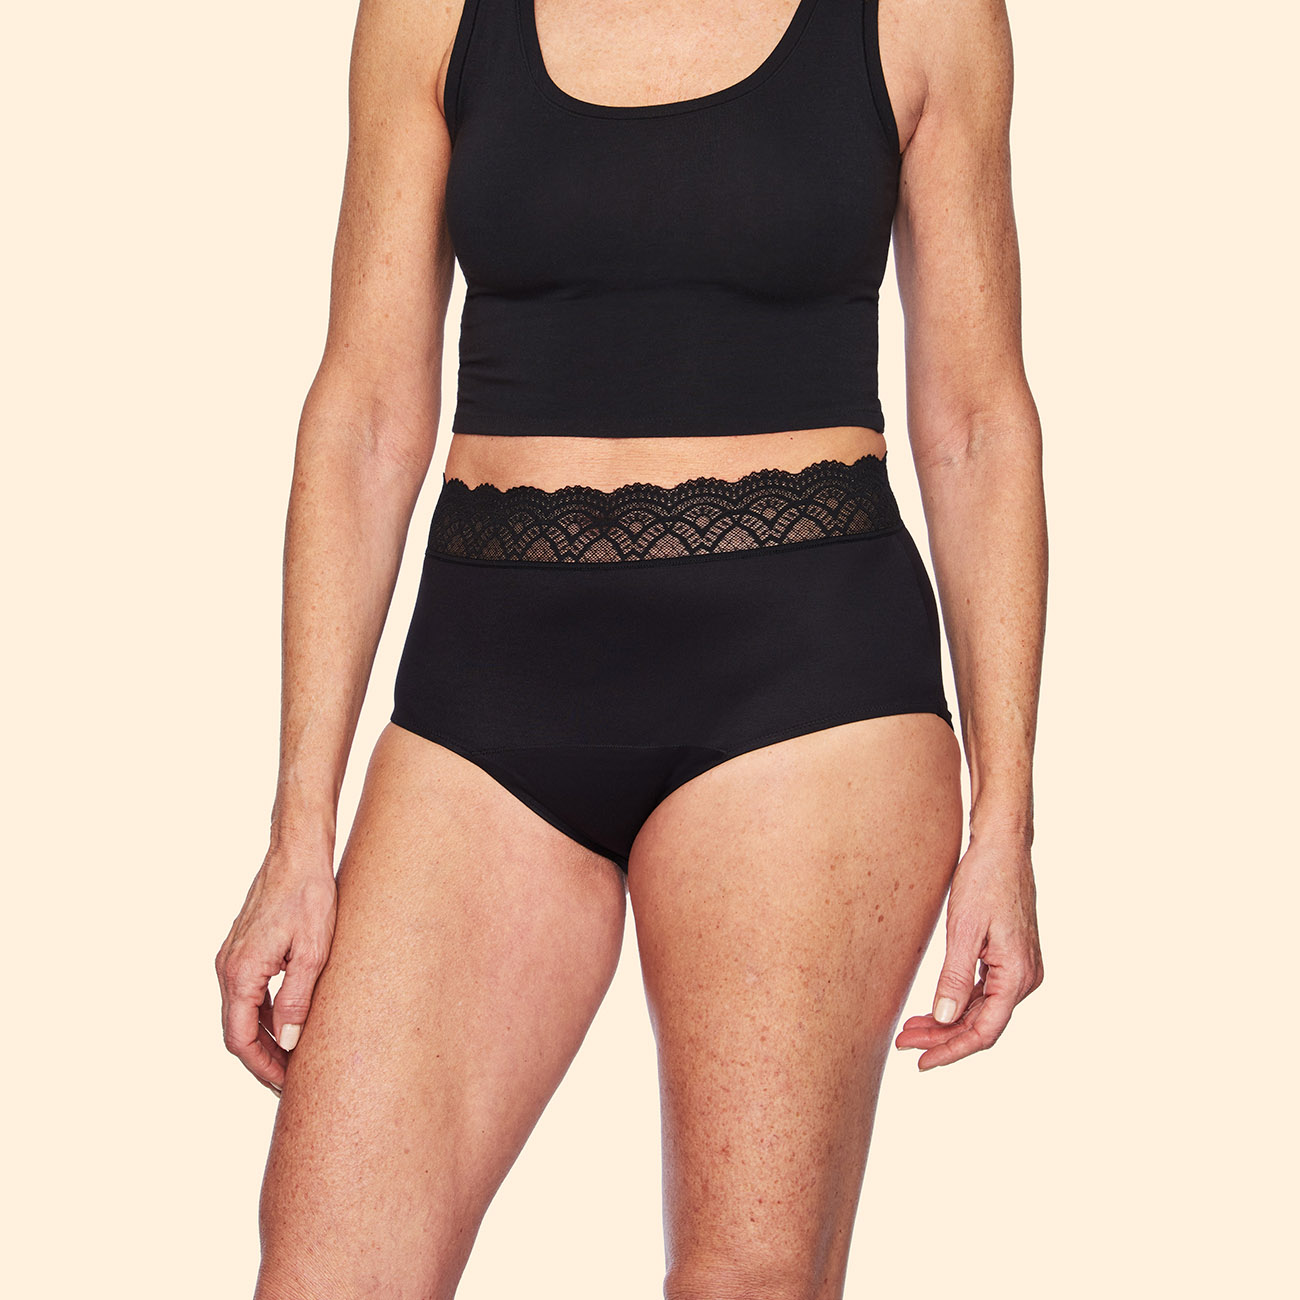  Speax By Thinx Hiphugger Incontinence Underwear For Women